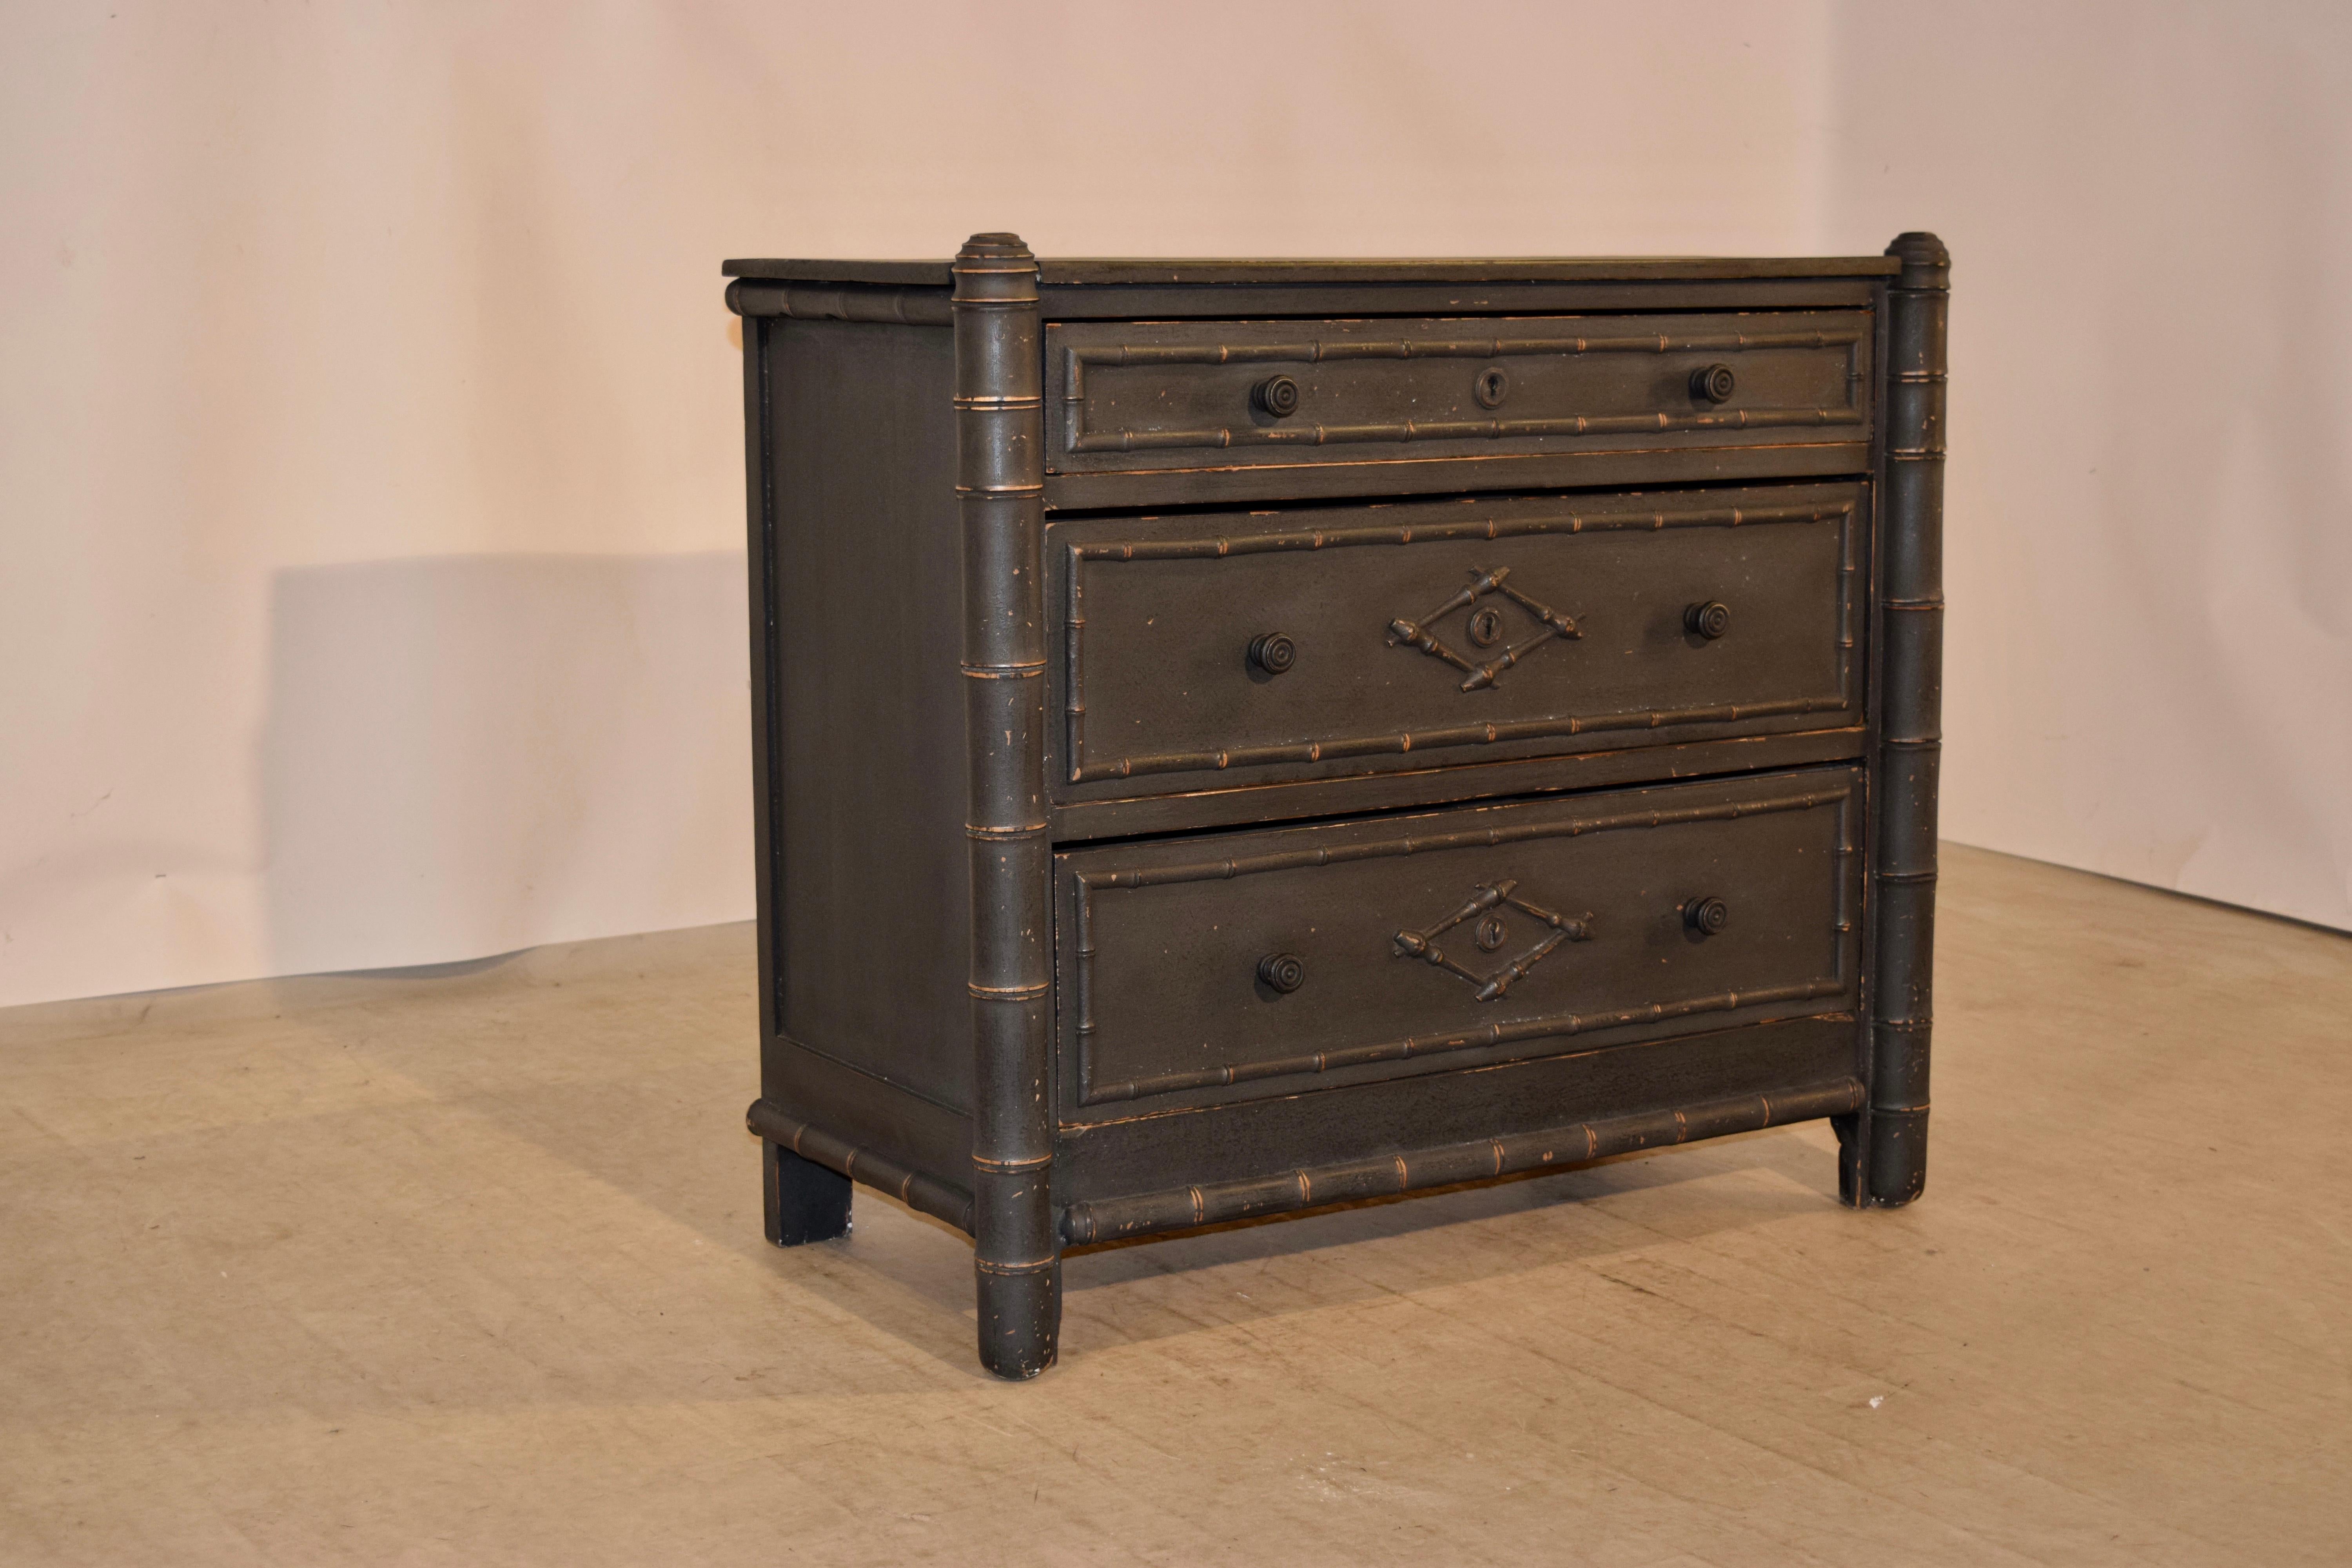 19th century chest of drawers from France with faux bamboo molding around the drawer fronts and case. The case has simple paneled sides and contains three drawers in the front, all with faux bamboo molded decoration and flanked by faux bamboo turned